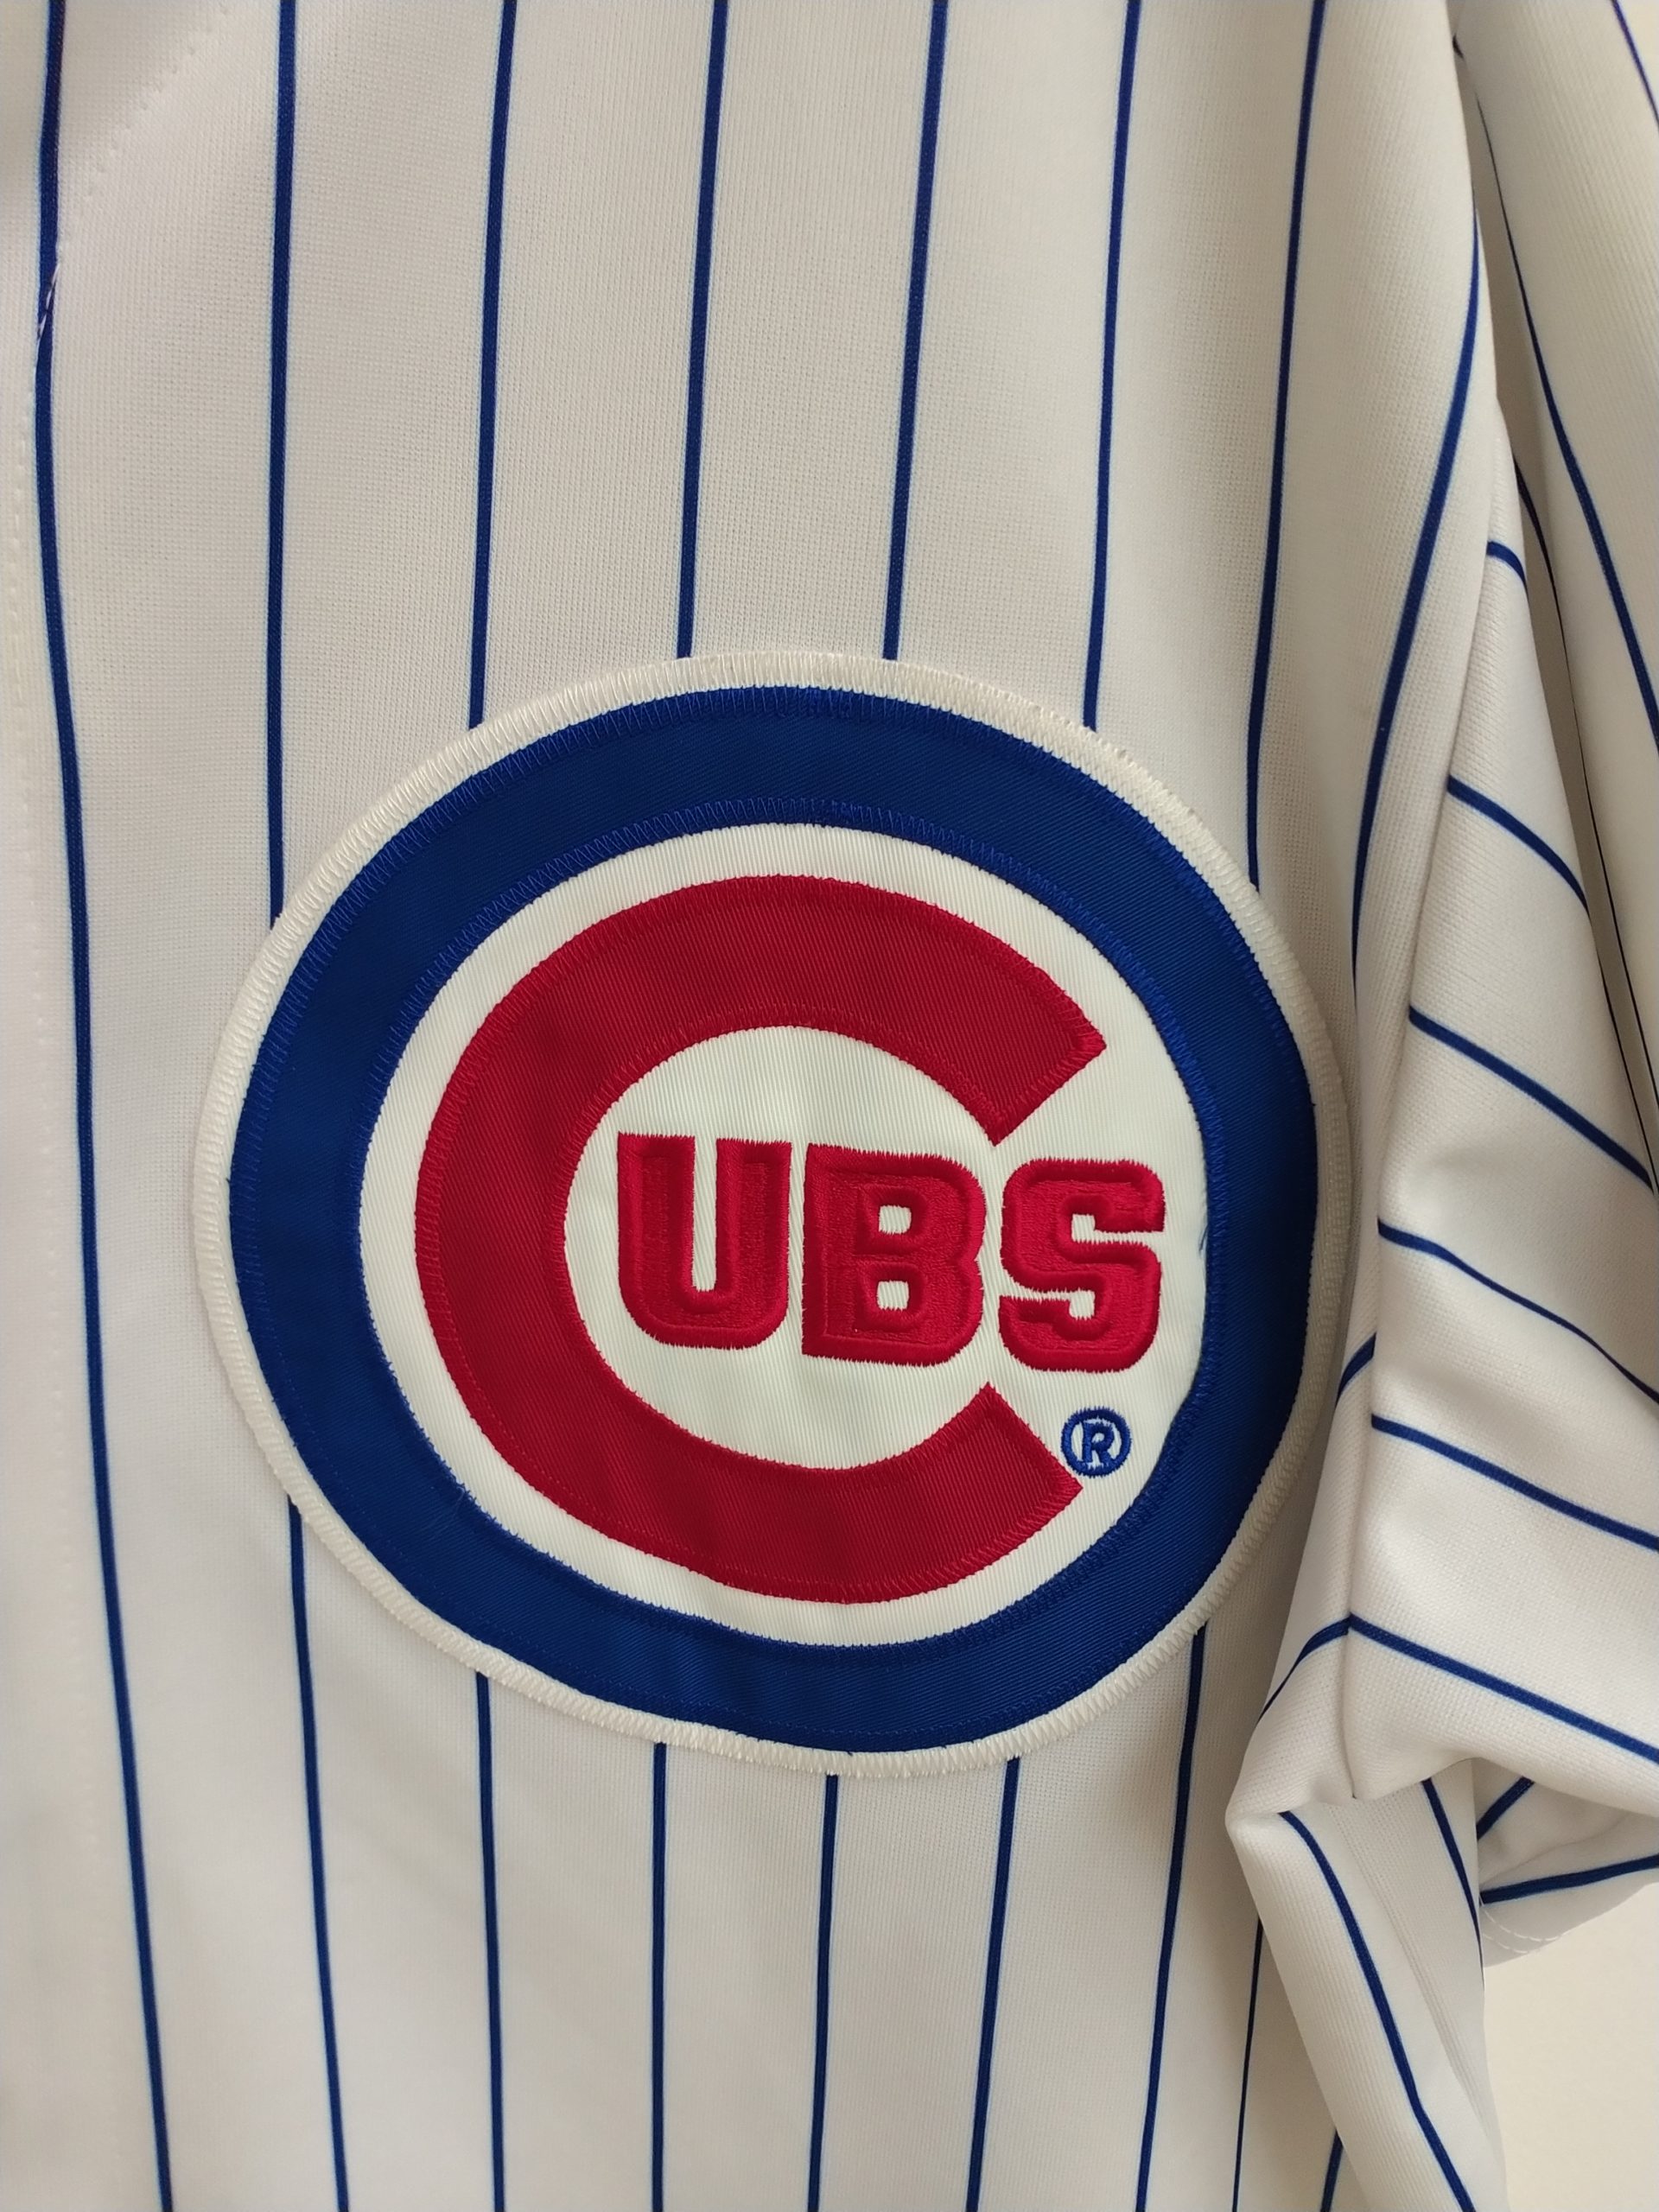 chicago cubs home jerseys